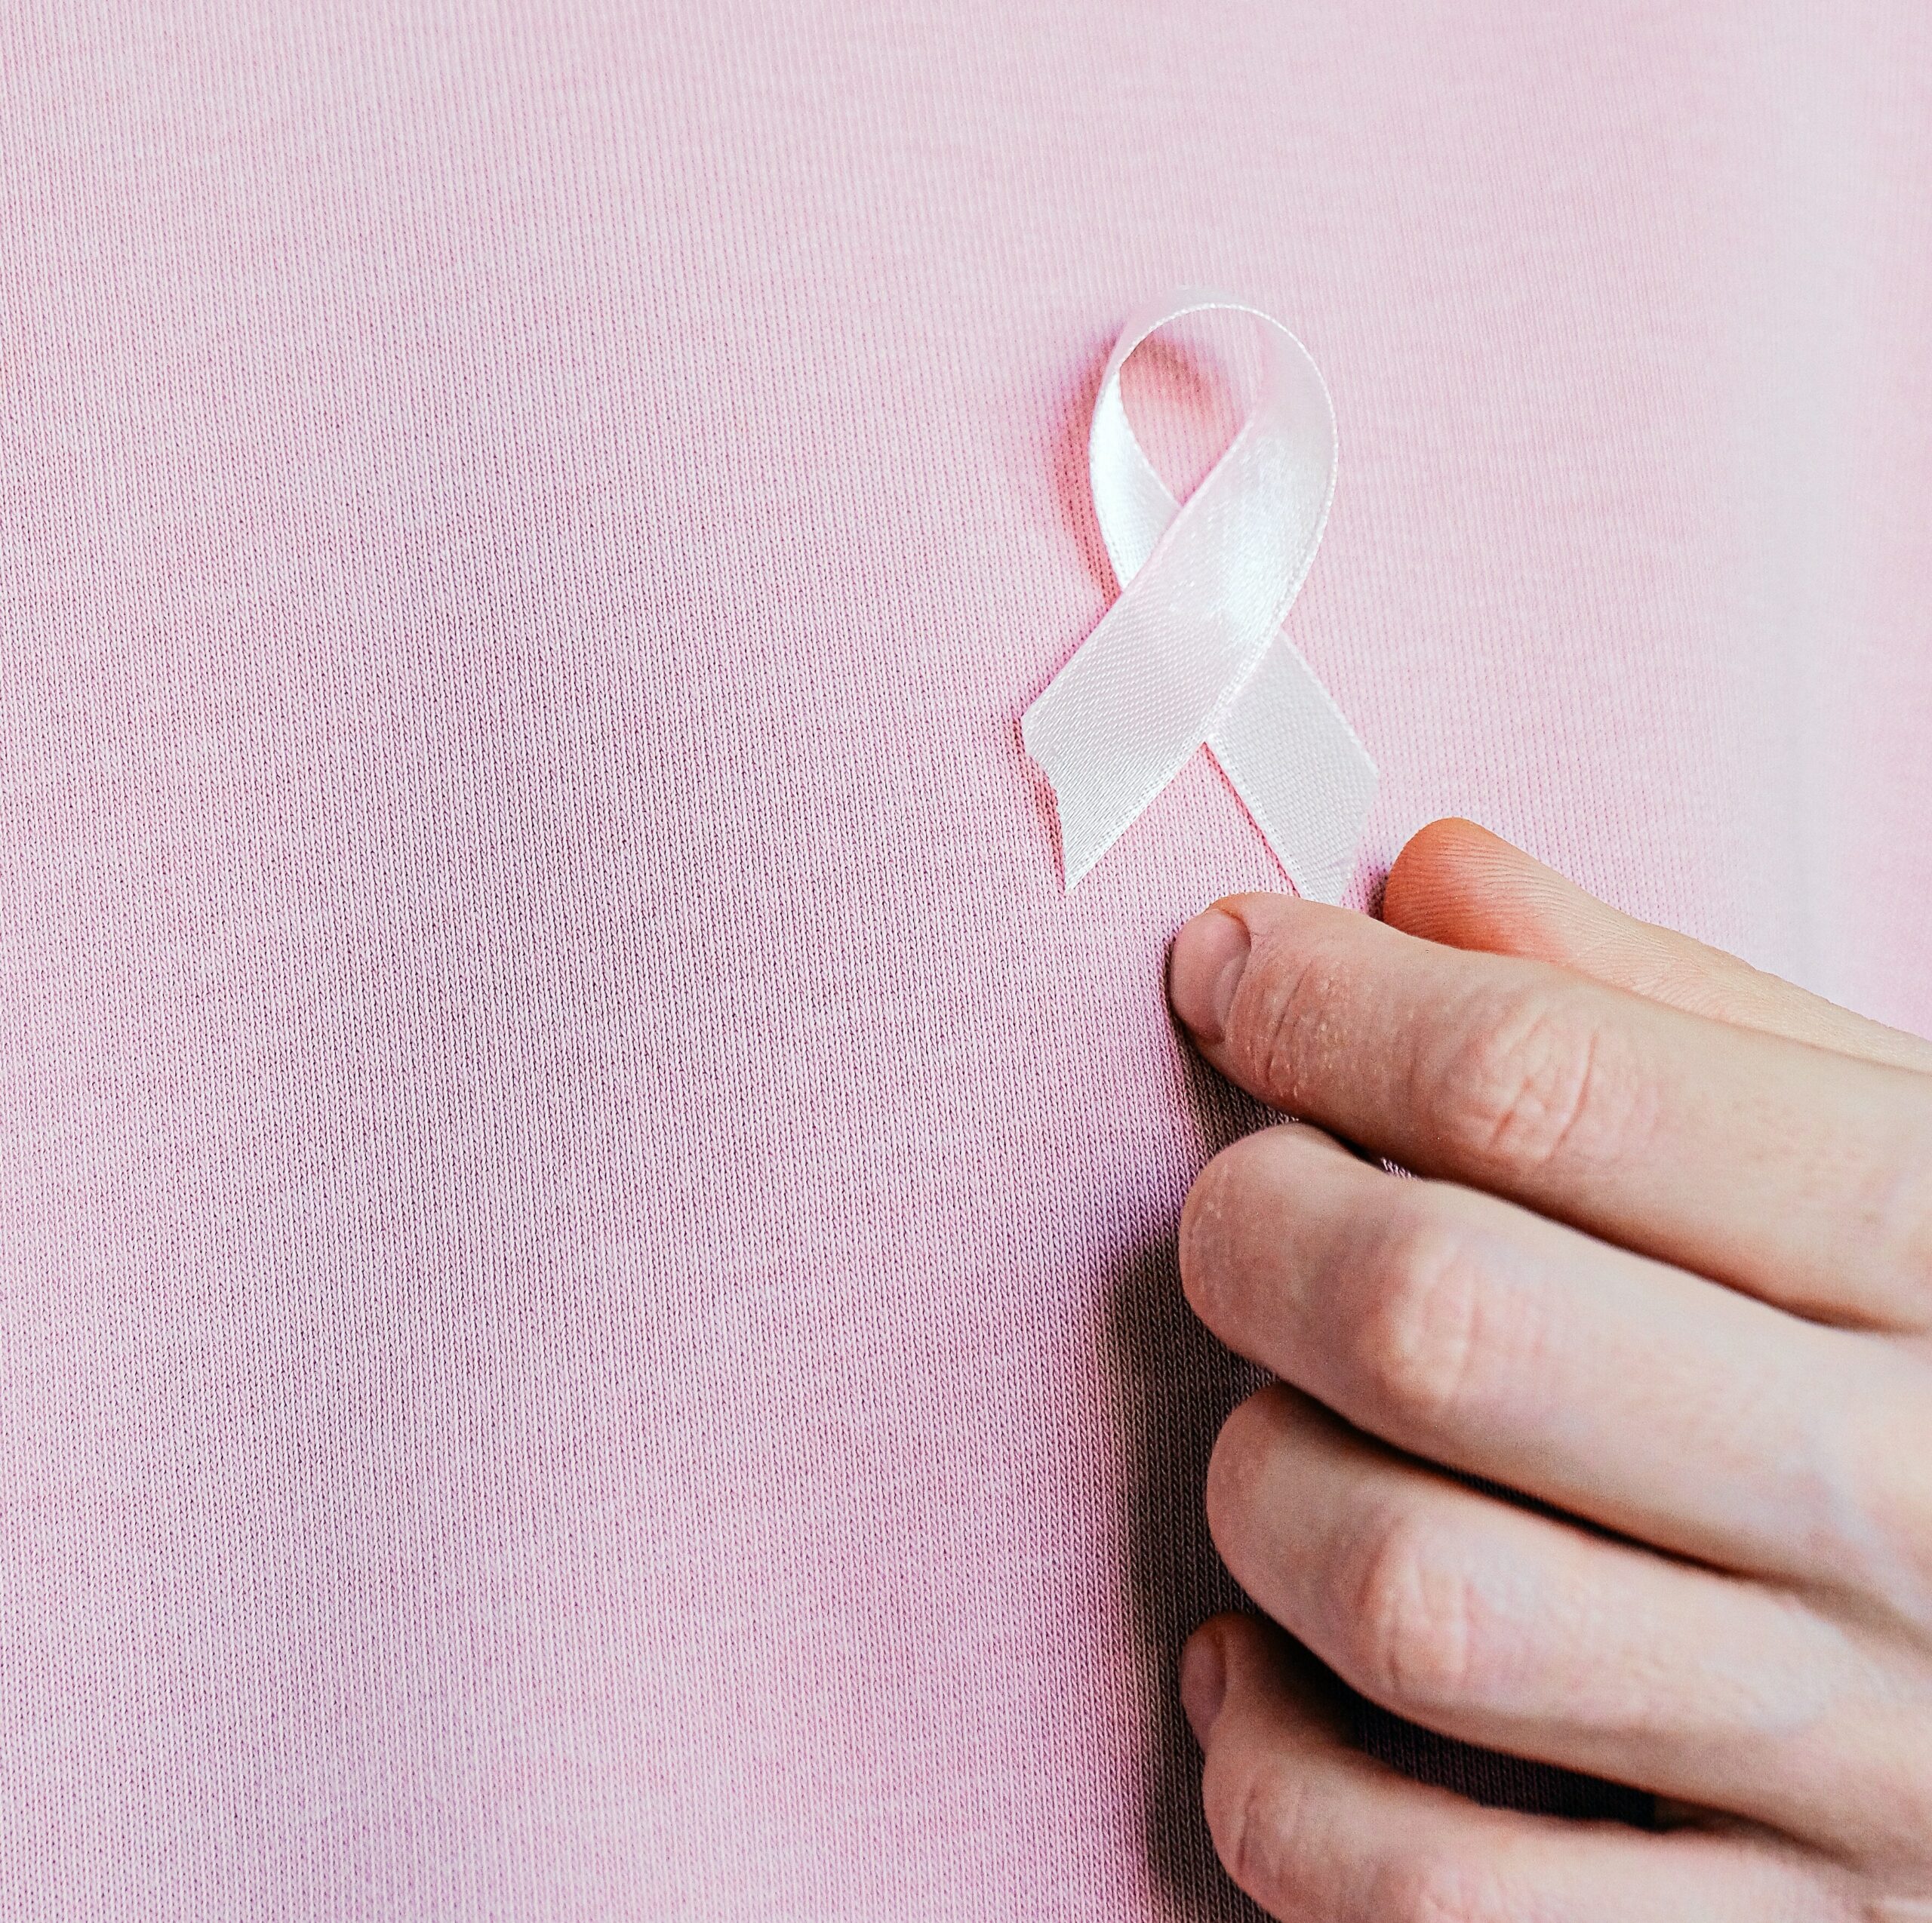 Living Well During and Following Breast Cancer by Dr. Hailey Jackson